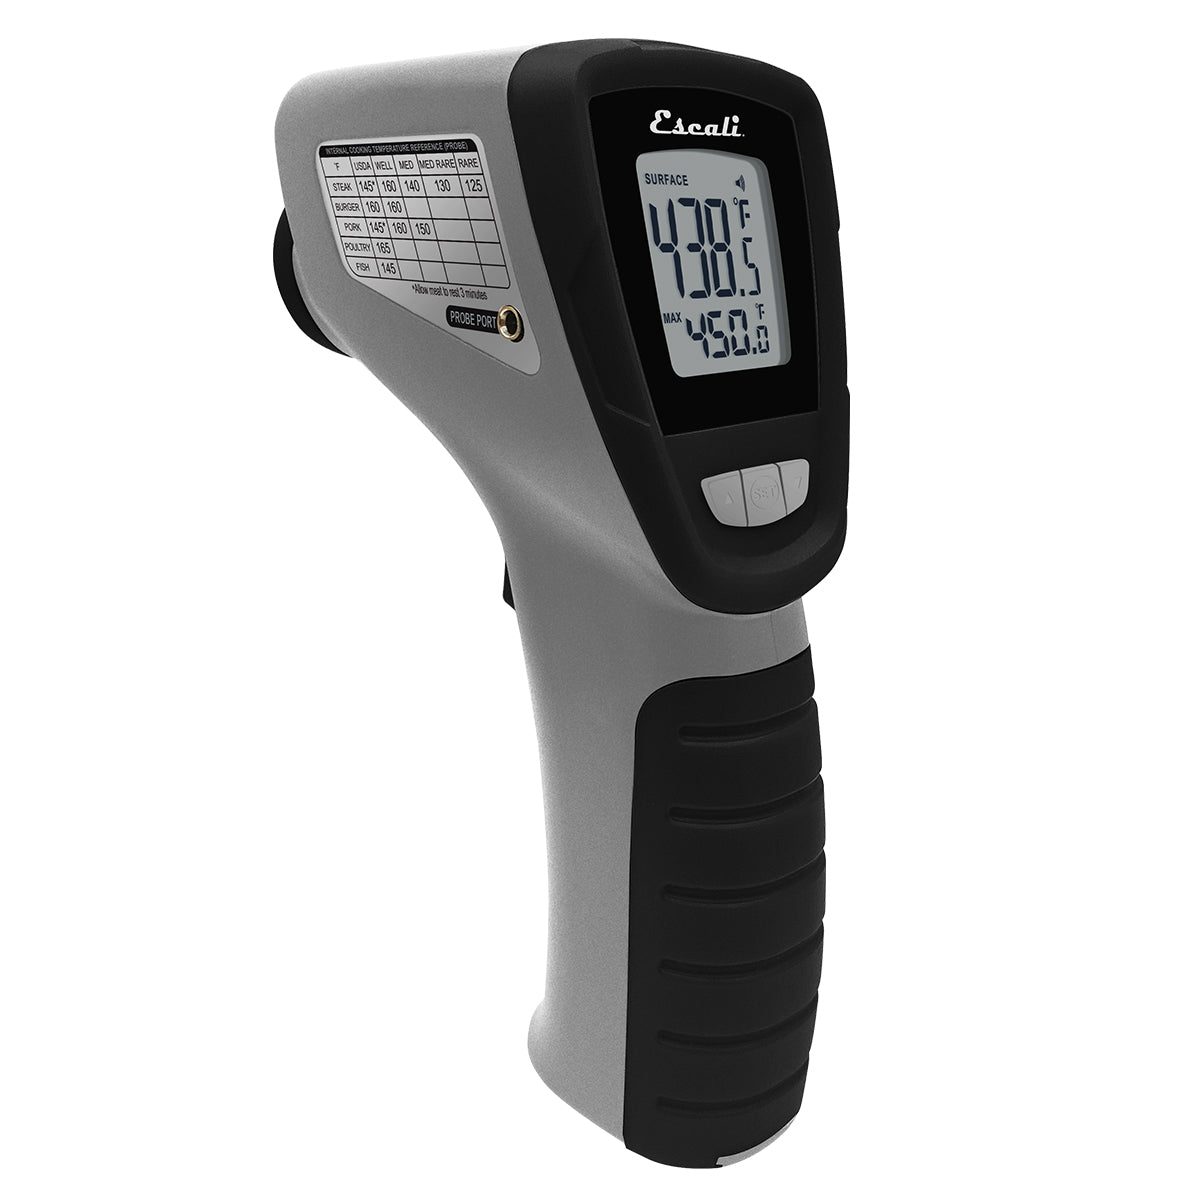 Infrared Surface and Probe Thermometer